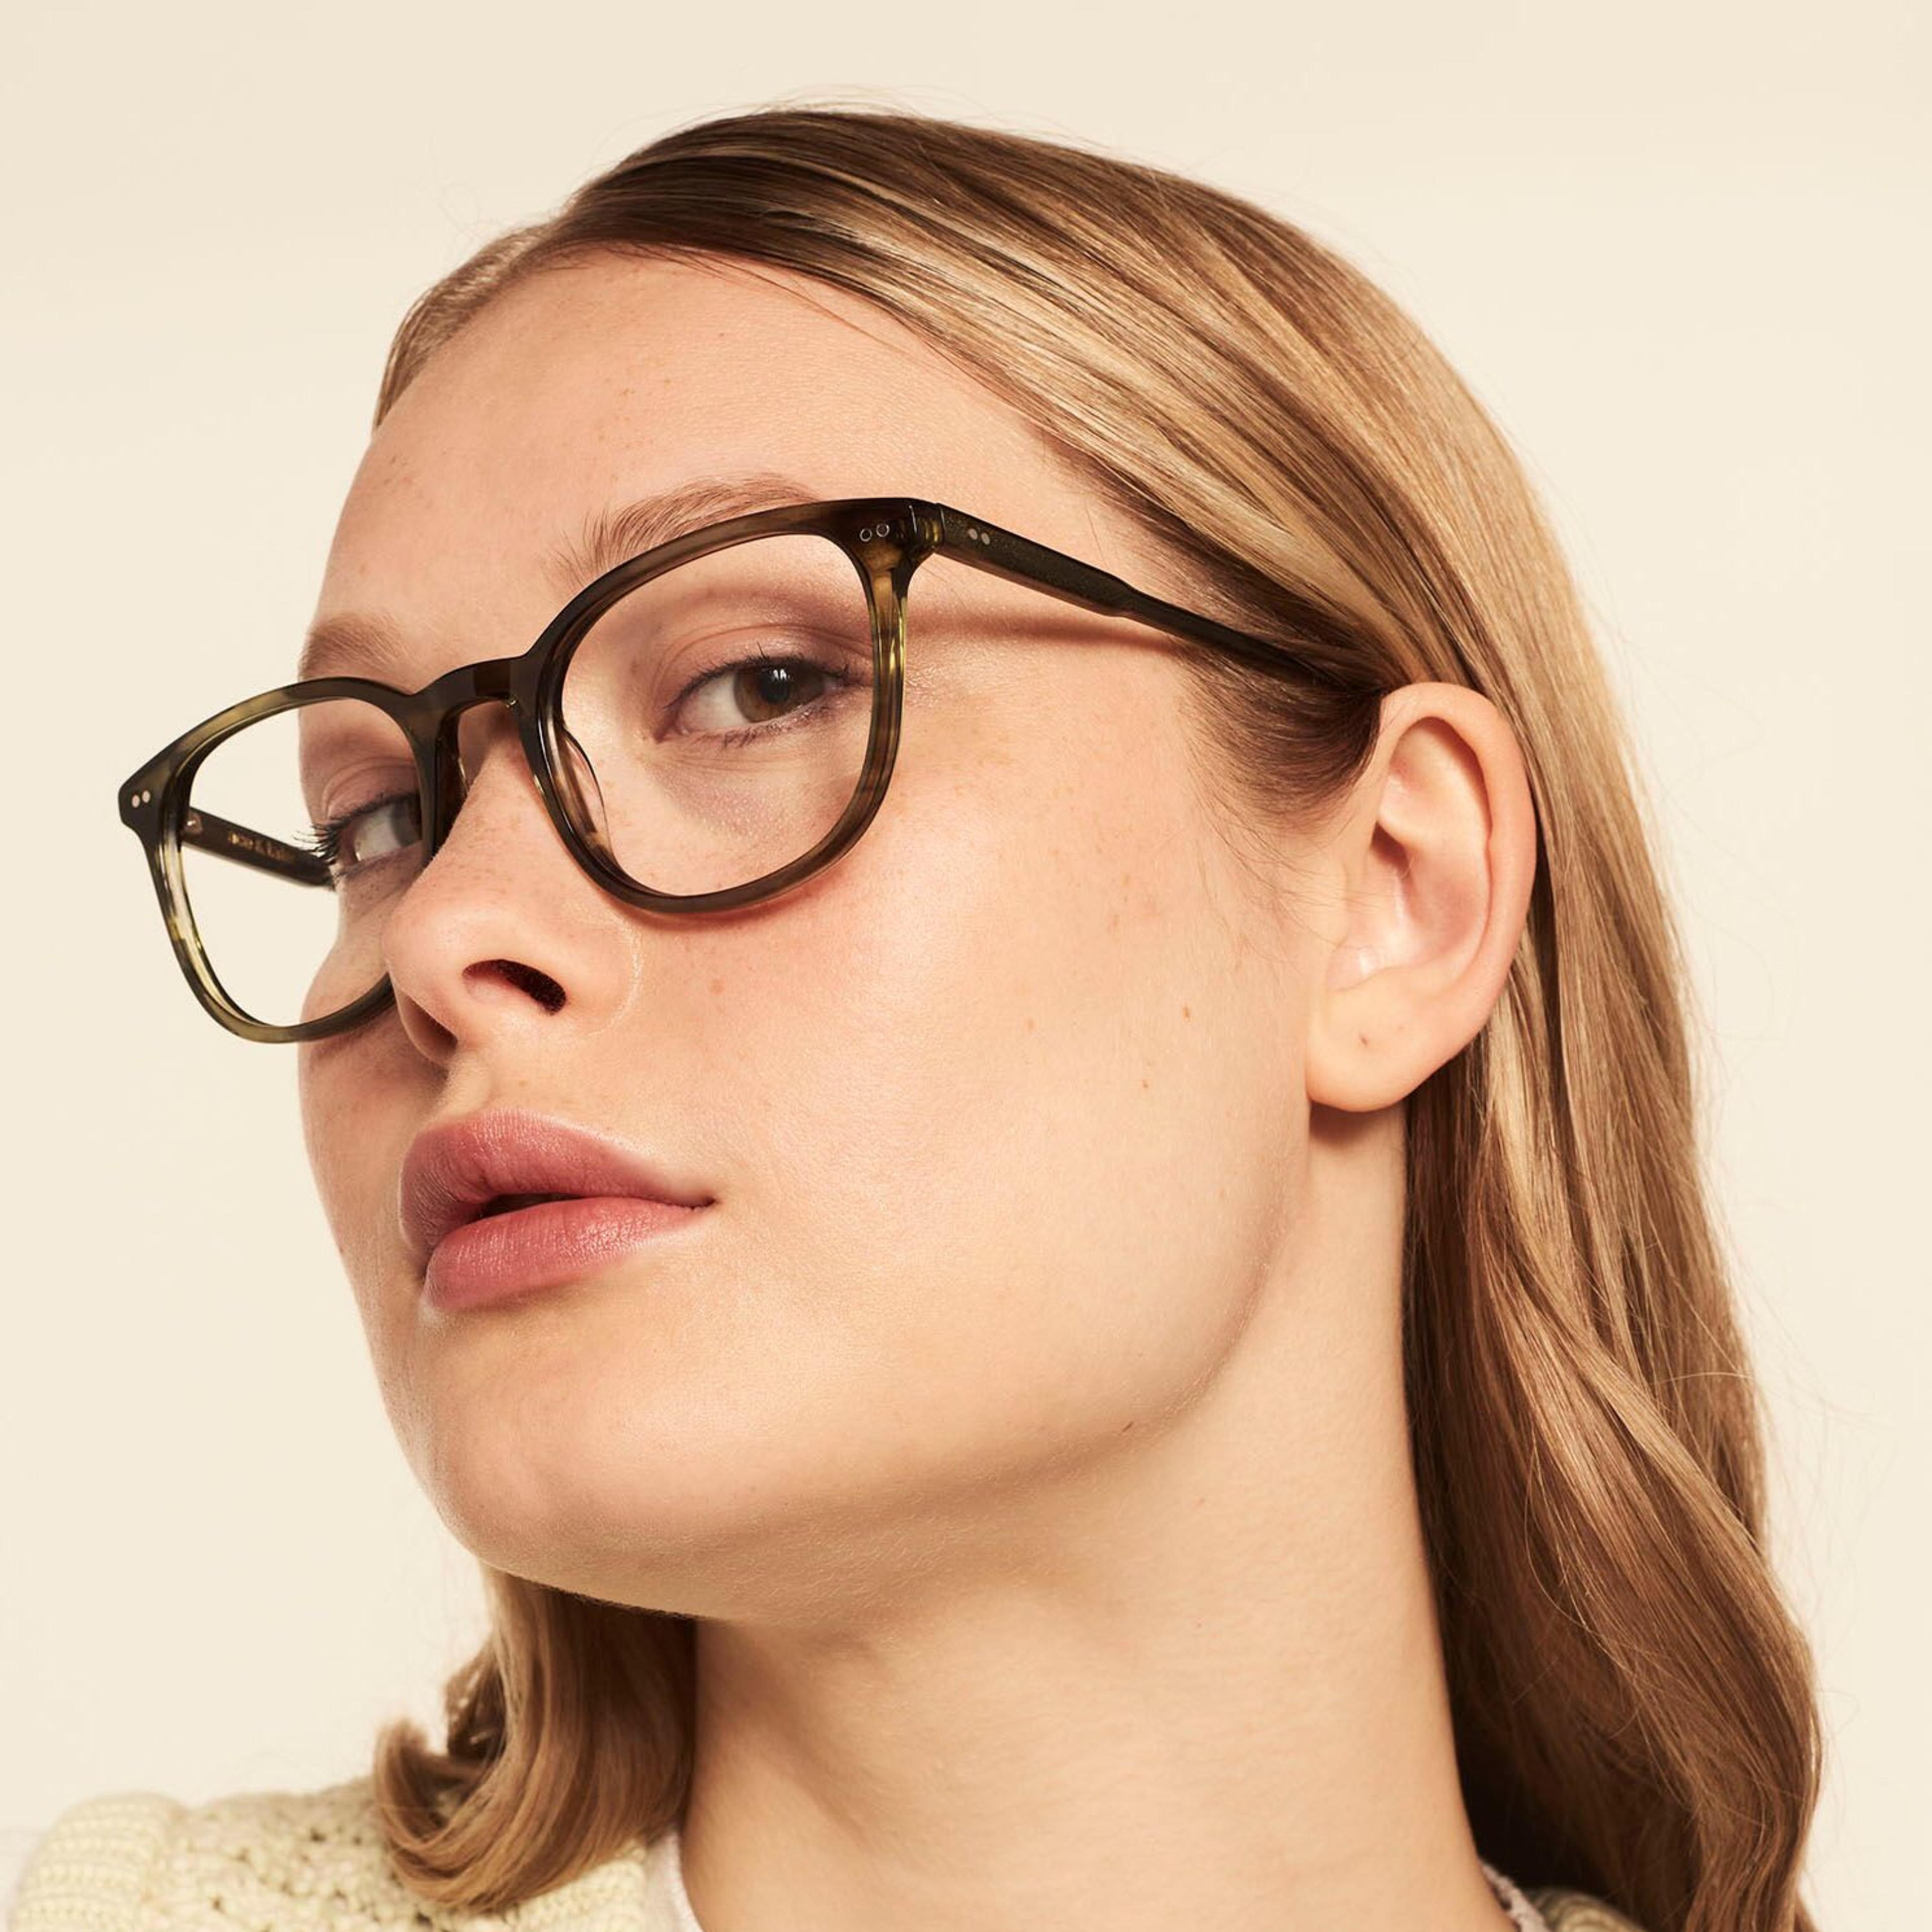 Ace & Tate Glasses | Round Acetate in Green